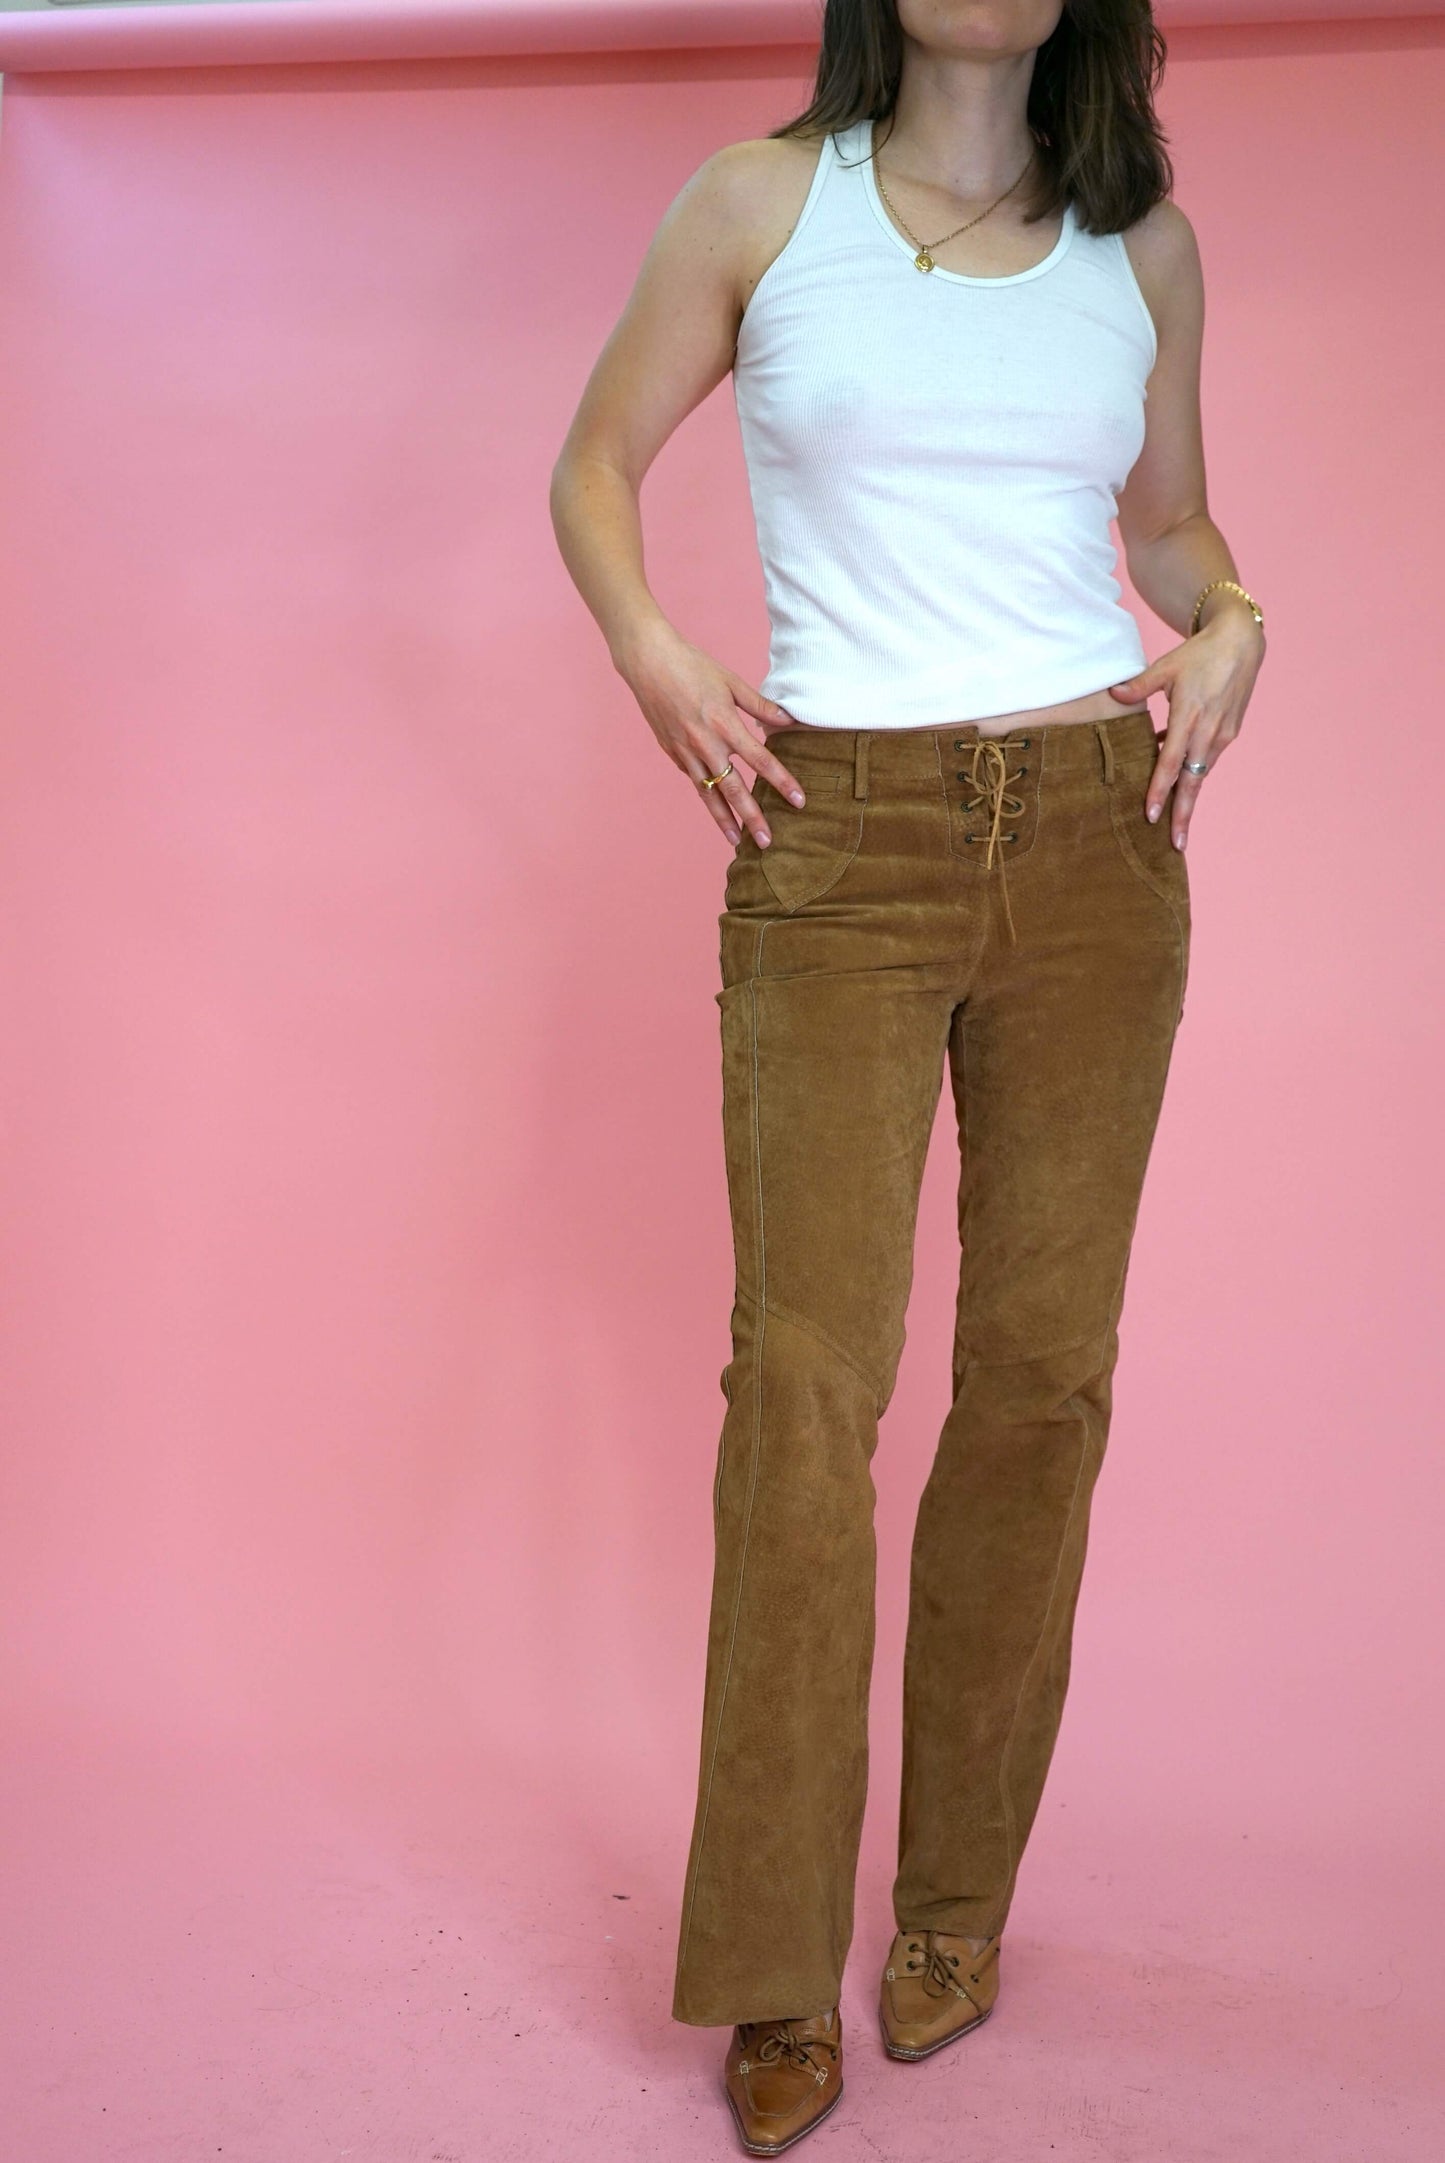 Vintage Western Suede Leather Tan Flared Trousers Low Waist Lace Up Size M W29-30